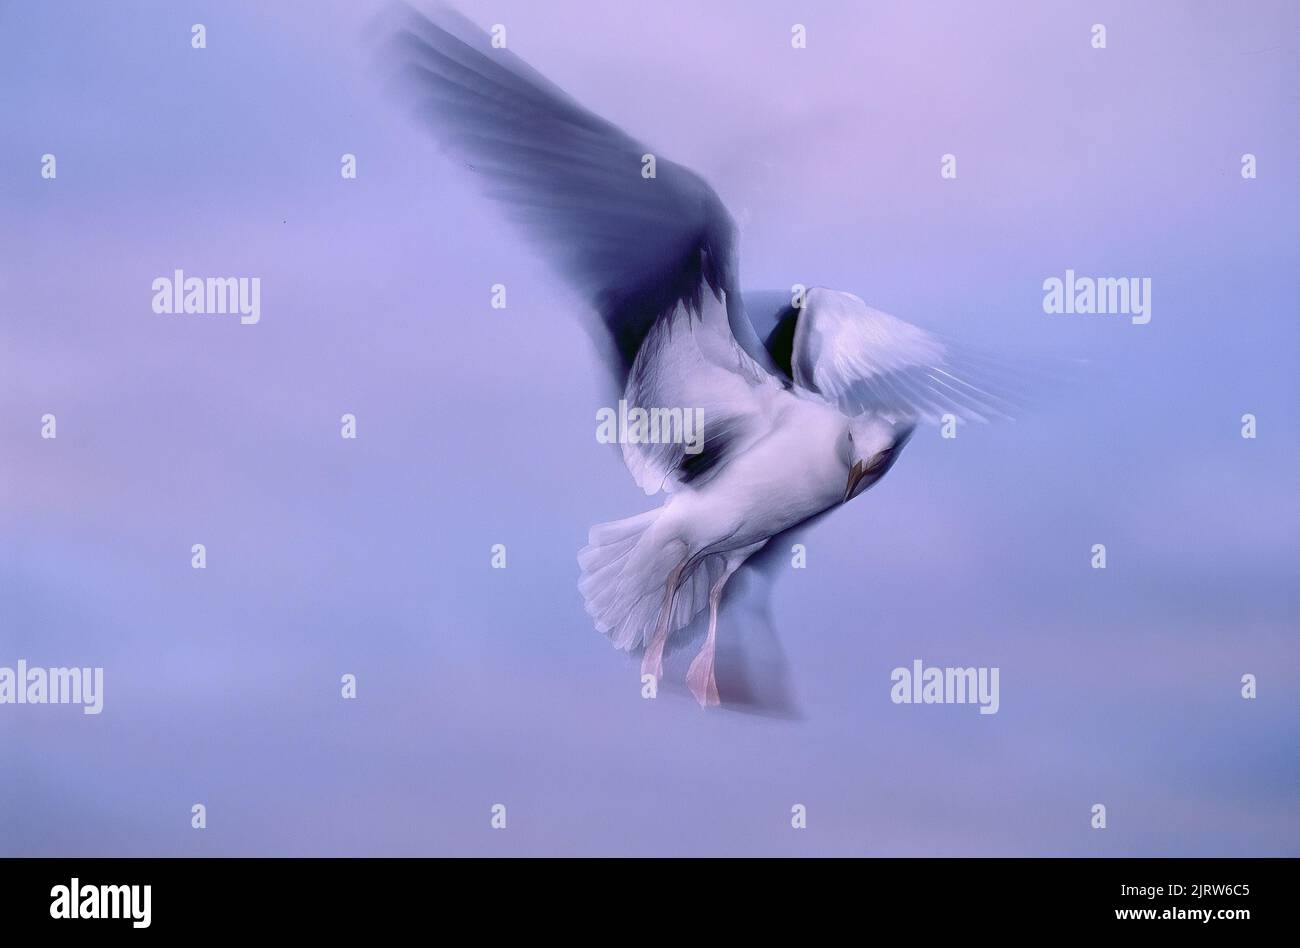 A seagull gliding through the air while photographed with a slow shutter to capture beautiful winged motion. Stock Photo